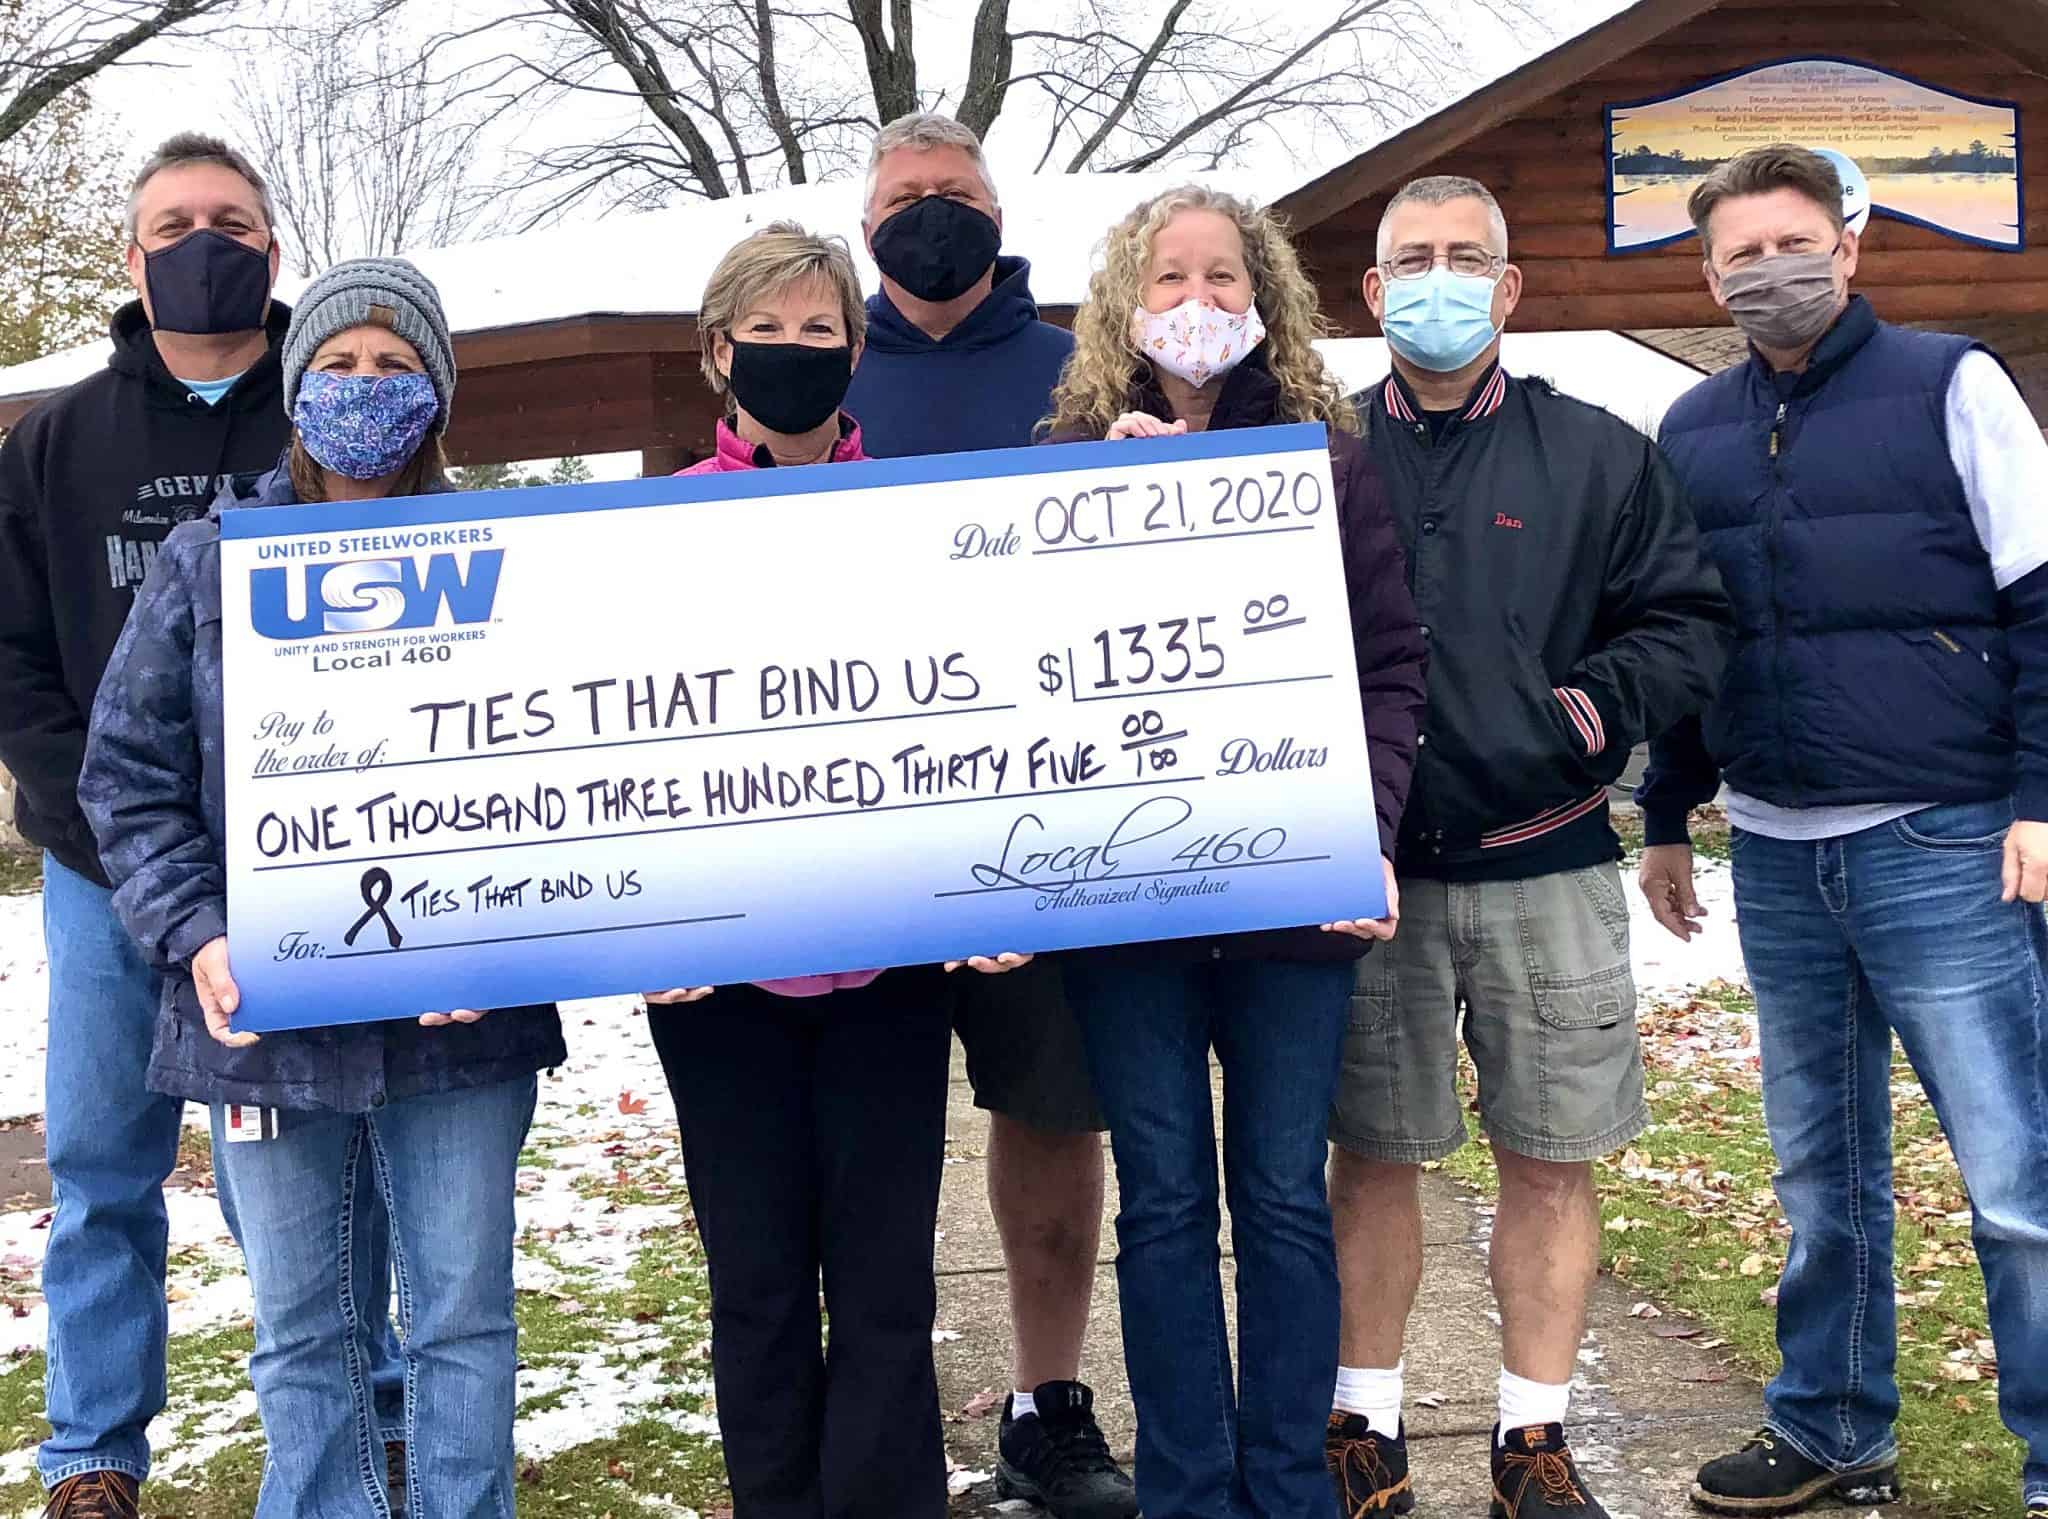 United Steel Workers Local 460 donates to Ties That Bind Us